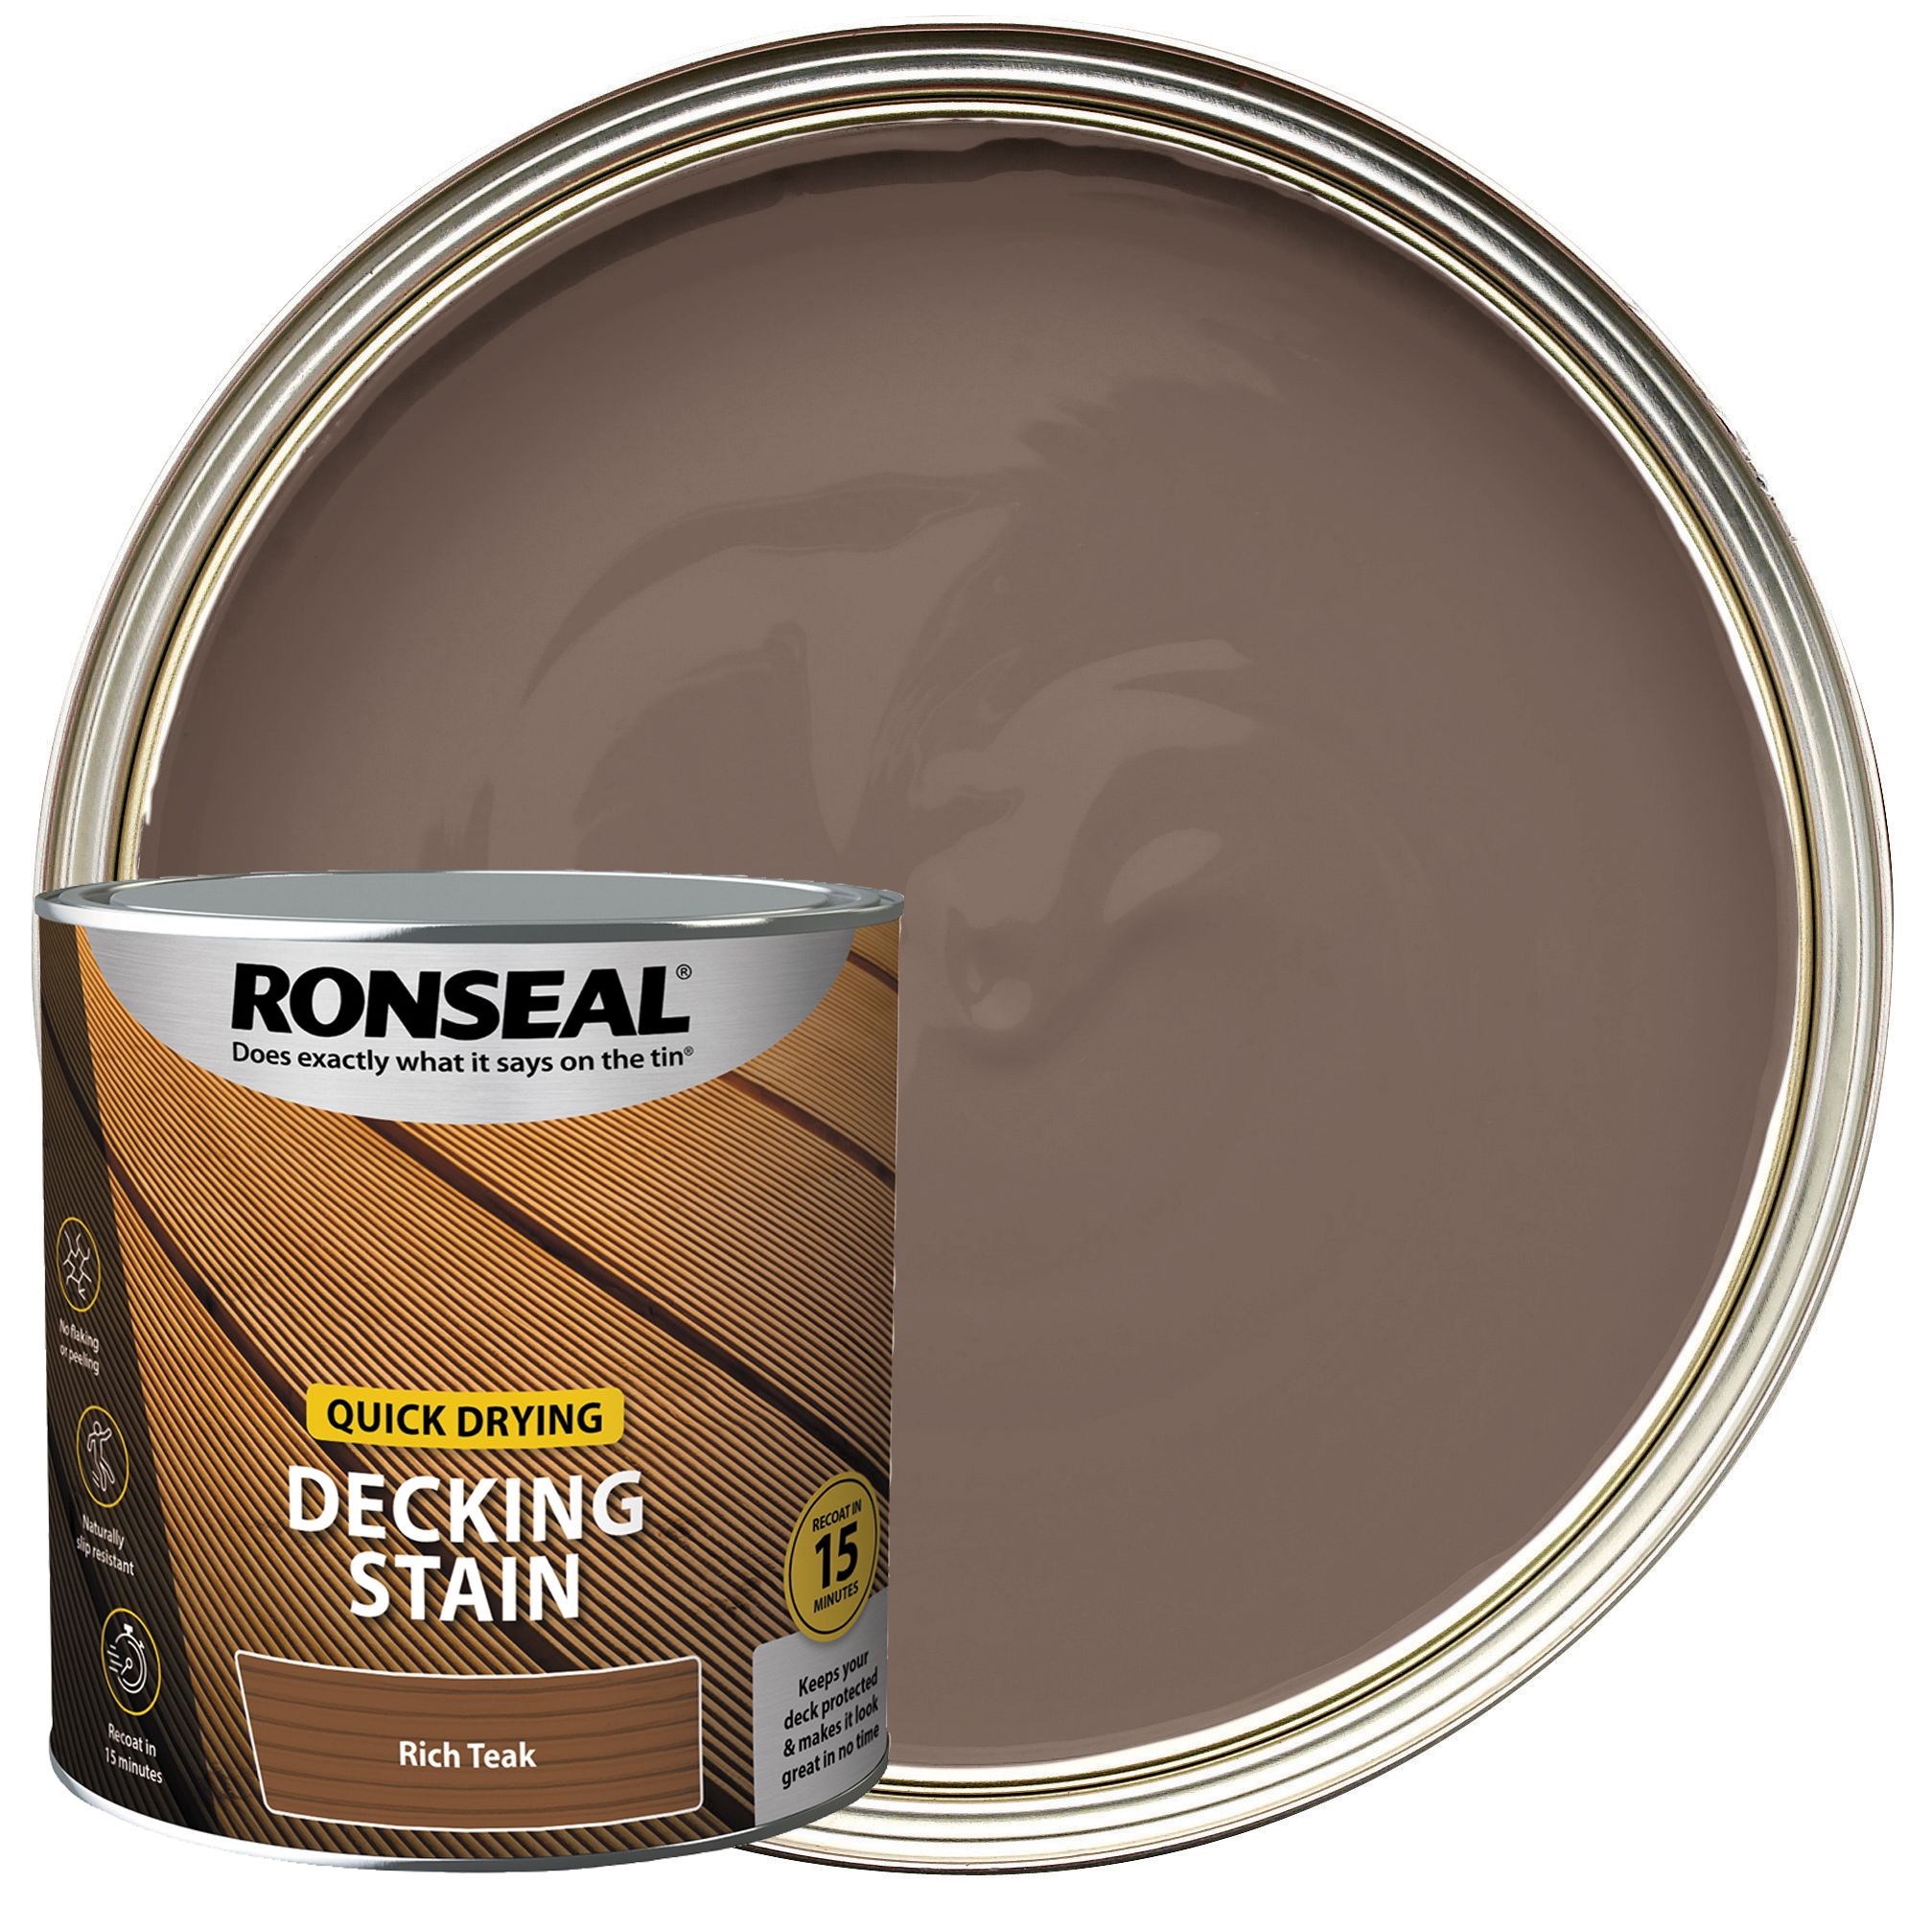 Image of Ronseal Rich Teak Quick Drying Decking Stain - 2.5L